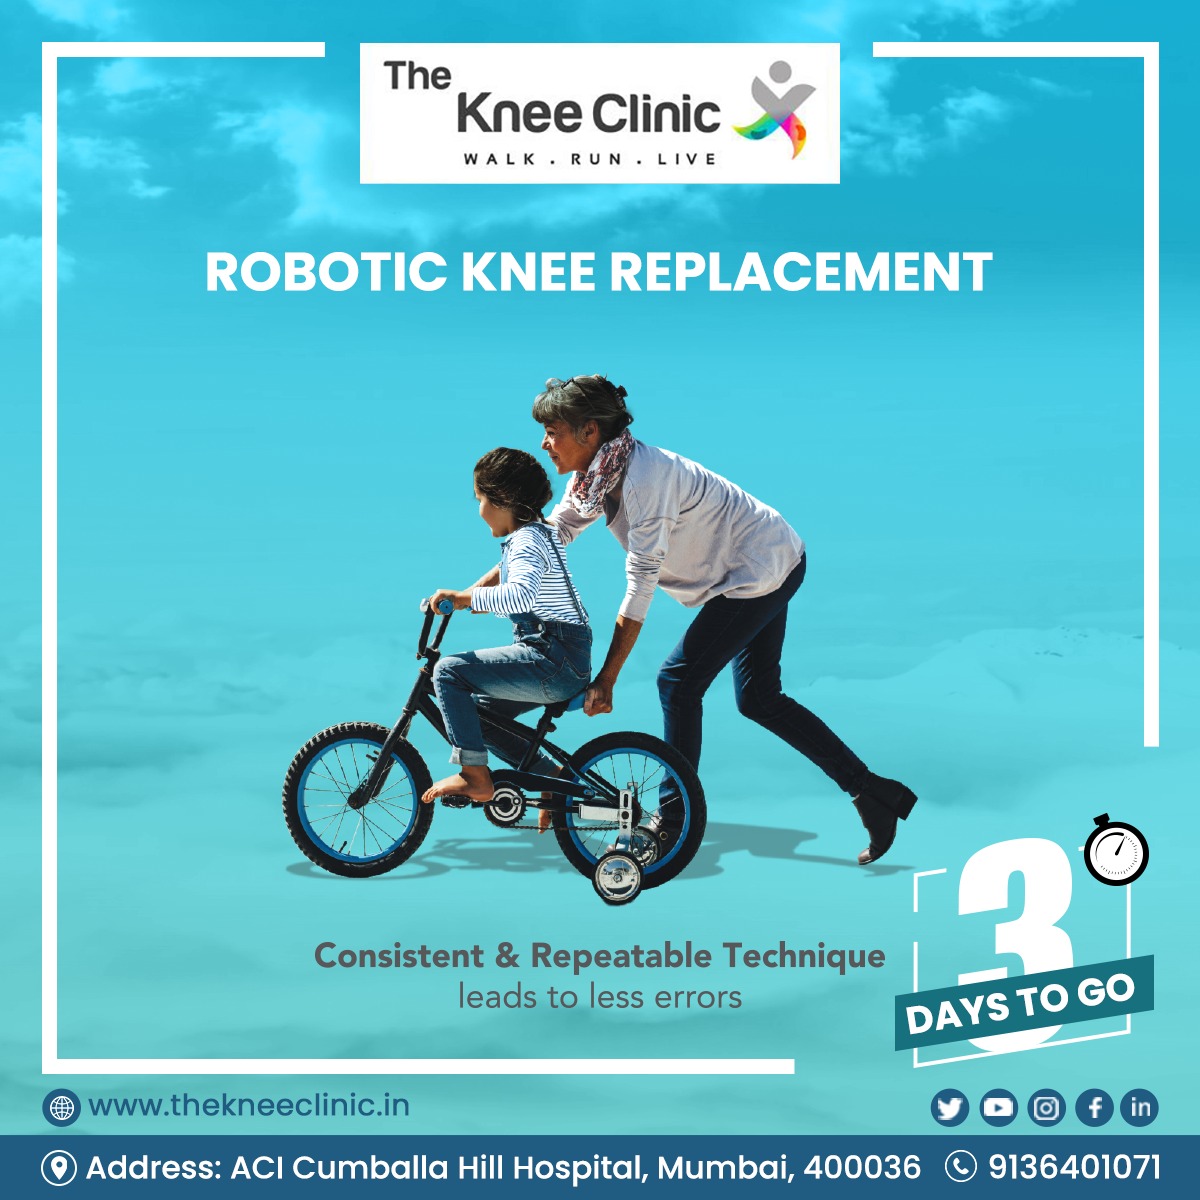 Countdown Begins for our New Robotic Friend! #PainlessTreatment - 3 Days to go 

'Taking the pain out of Knee Replacement Surgeries with our Robotics-Assisted Knee Replacement Platform'
#RoboticKneeReplacement #kneepain #Mumbai #TheKneeClinic